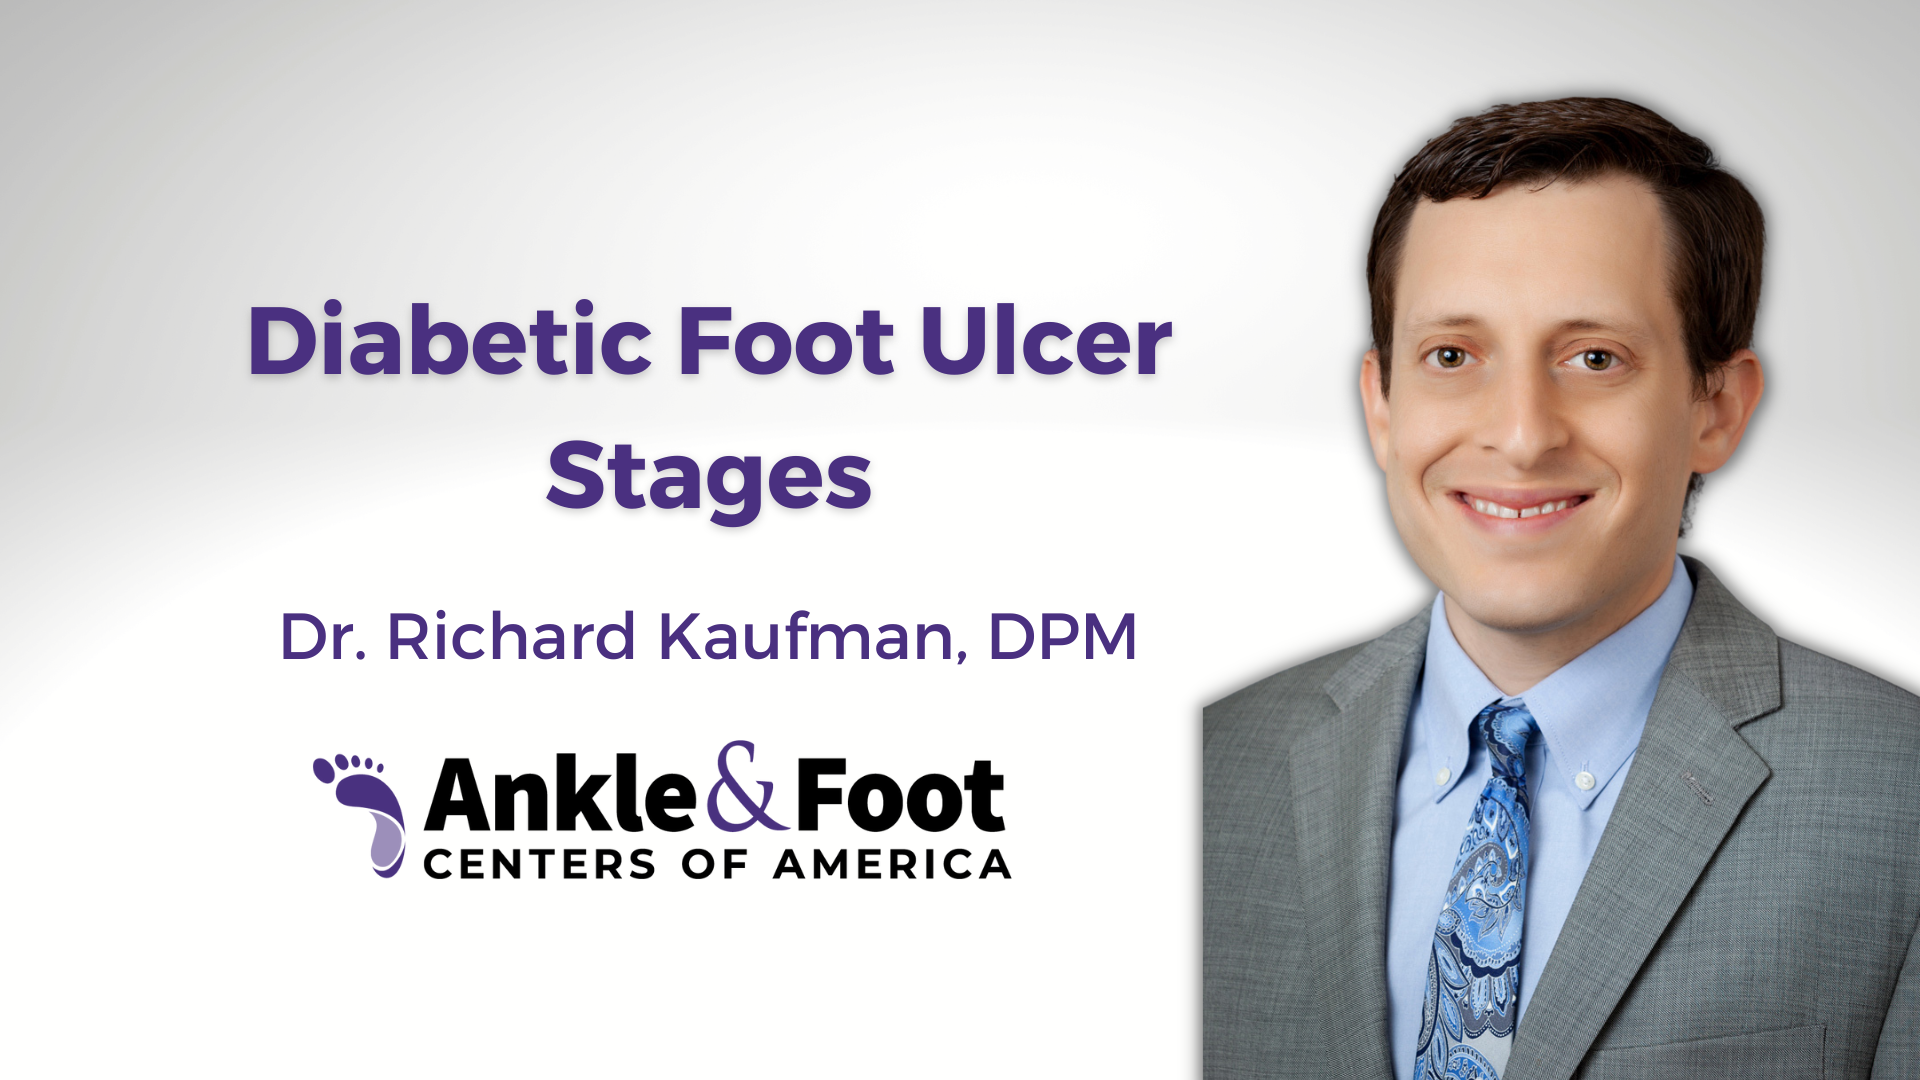 Diabetic Foot Ulcer Stages – Atlanta Wound Specialist Explains